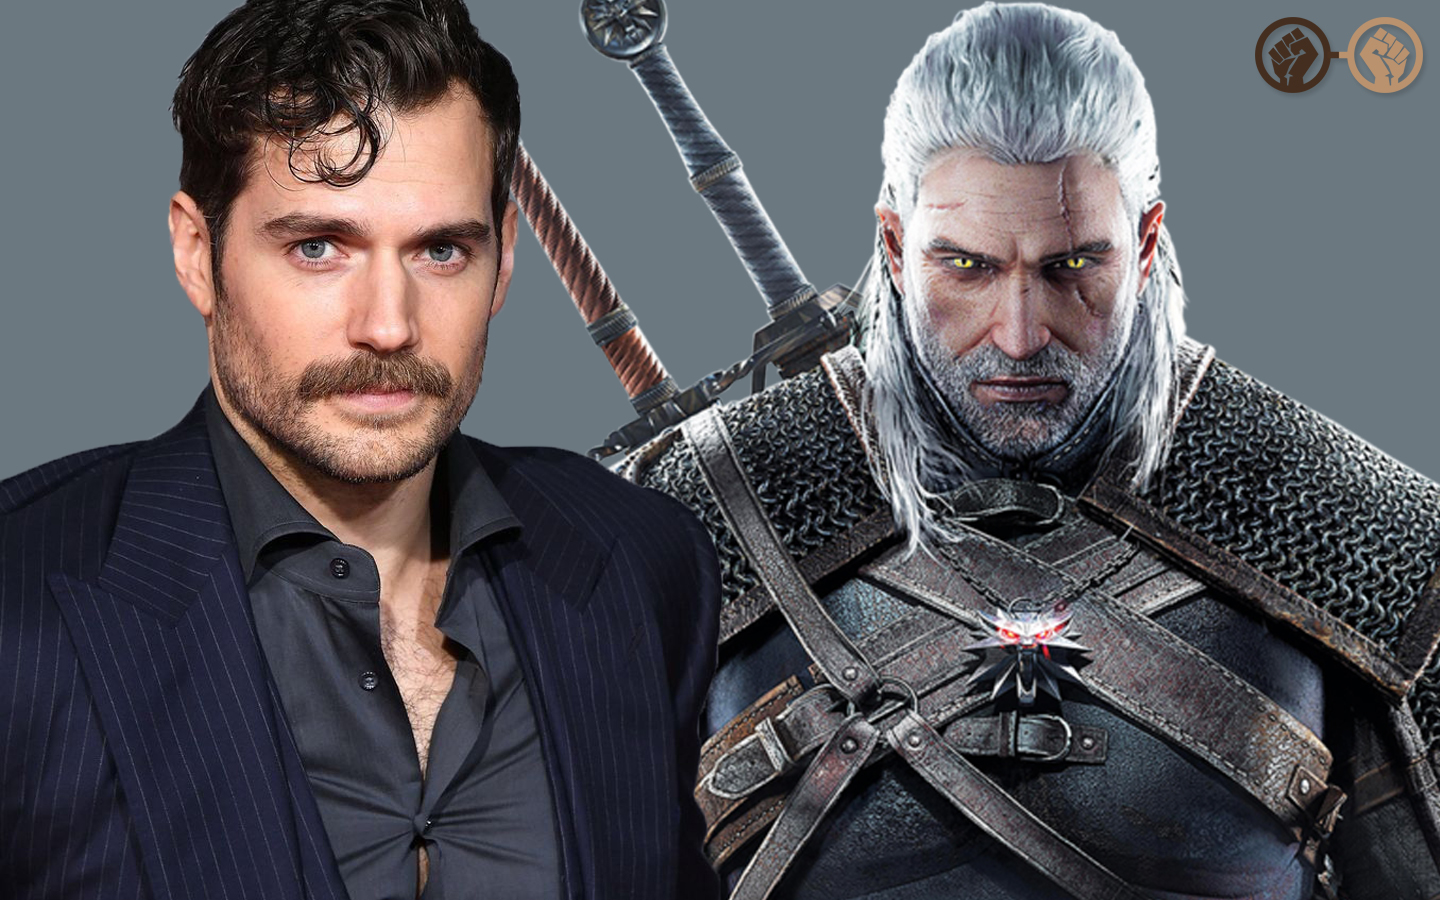 Henry Cavill Cast as Lead in Netflix’s ‘The Witcher’ Series